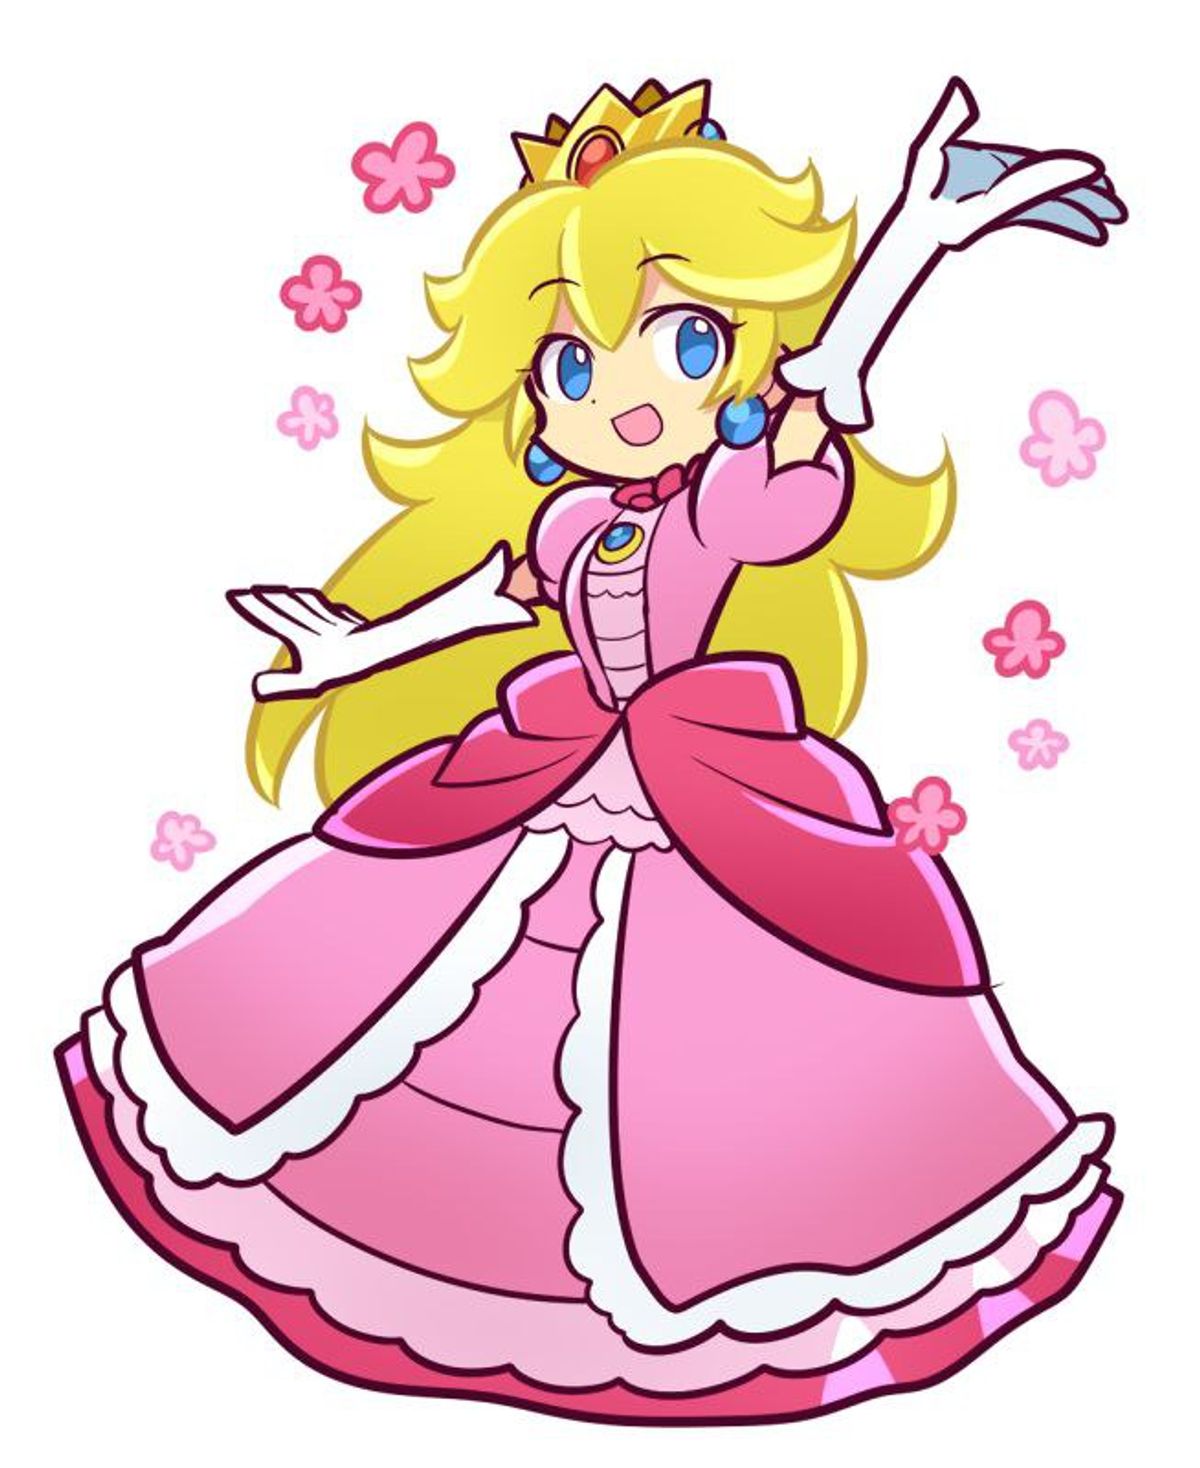 Is Princess Peach Giving Unrealistic Expectations to Royalty?